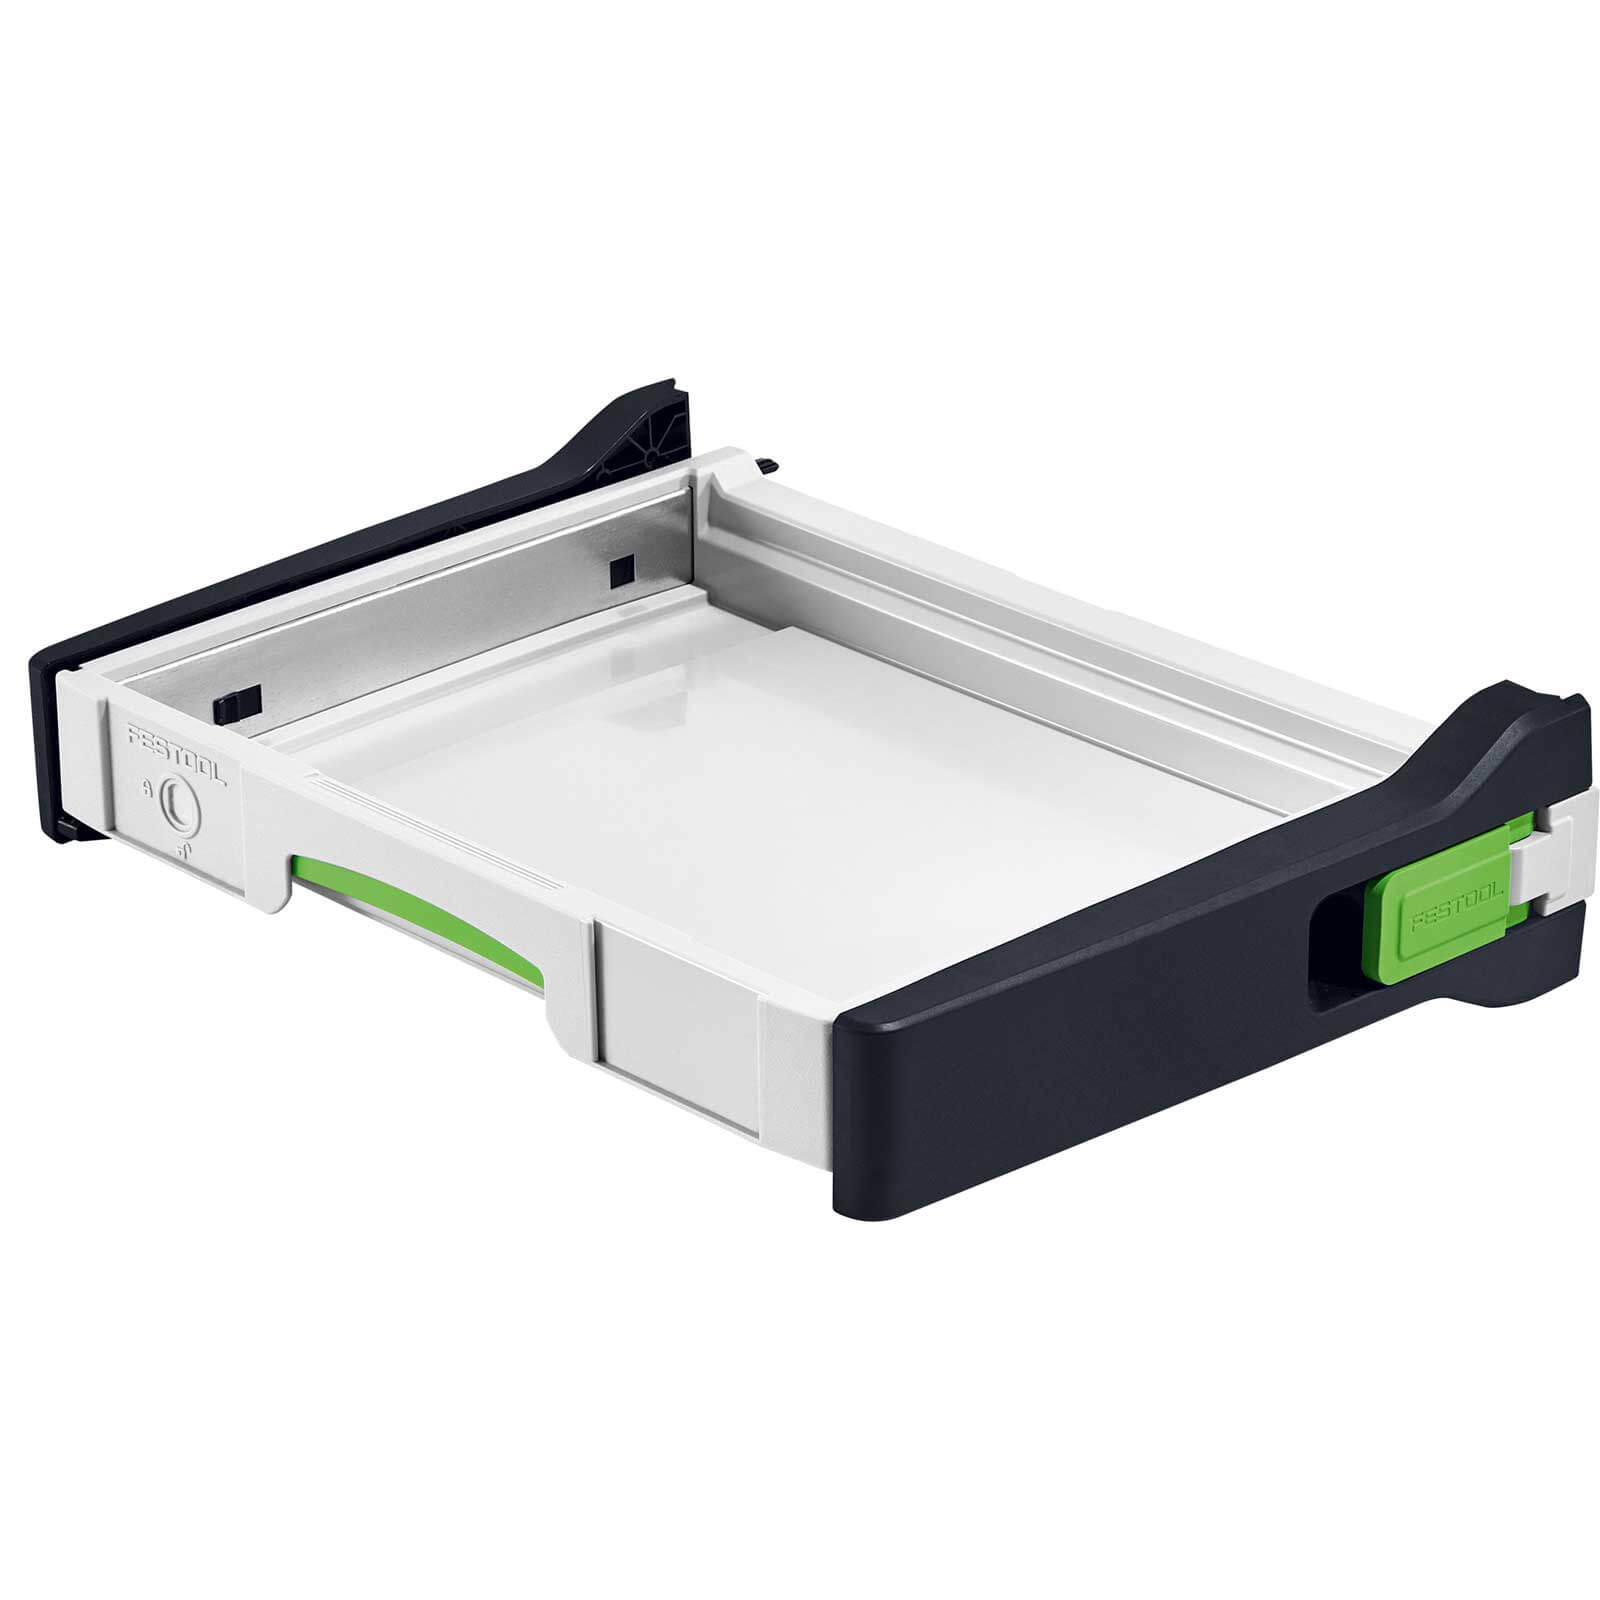 Photo of Festool Pull Out Systainer Drawer For Mobile Workshop